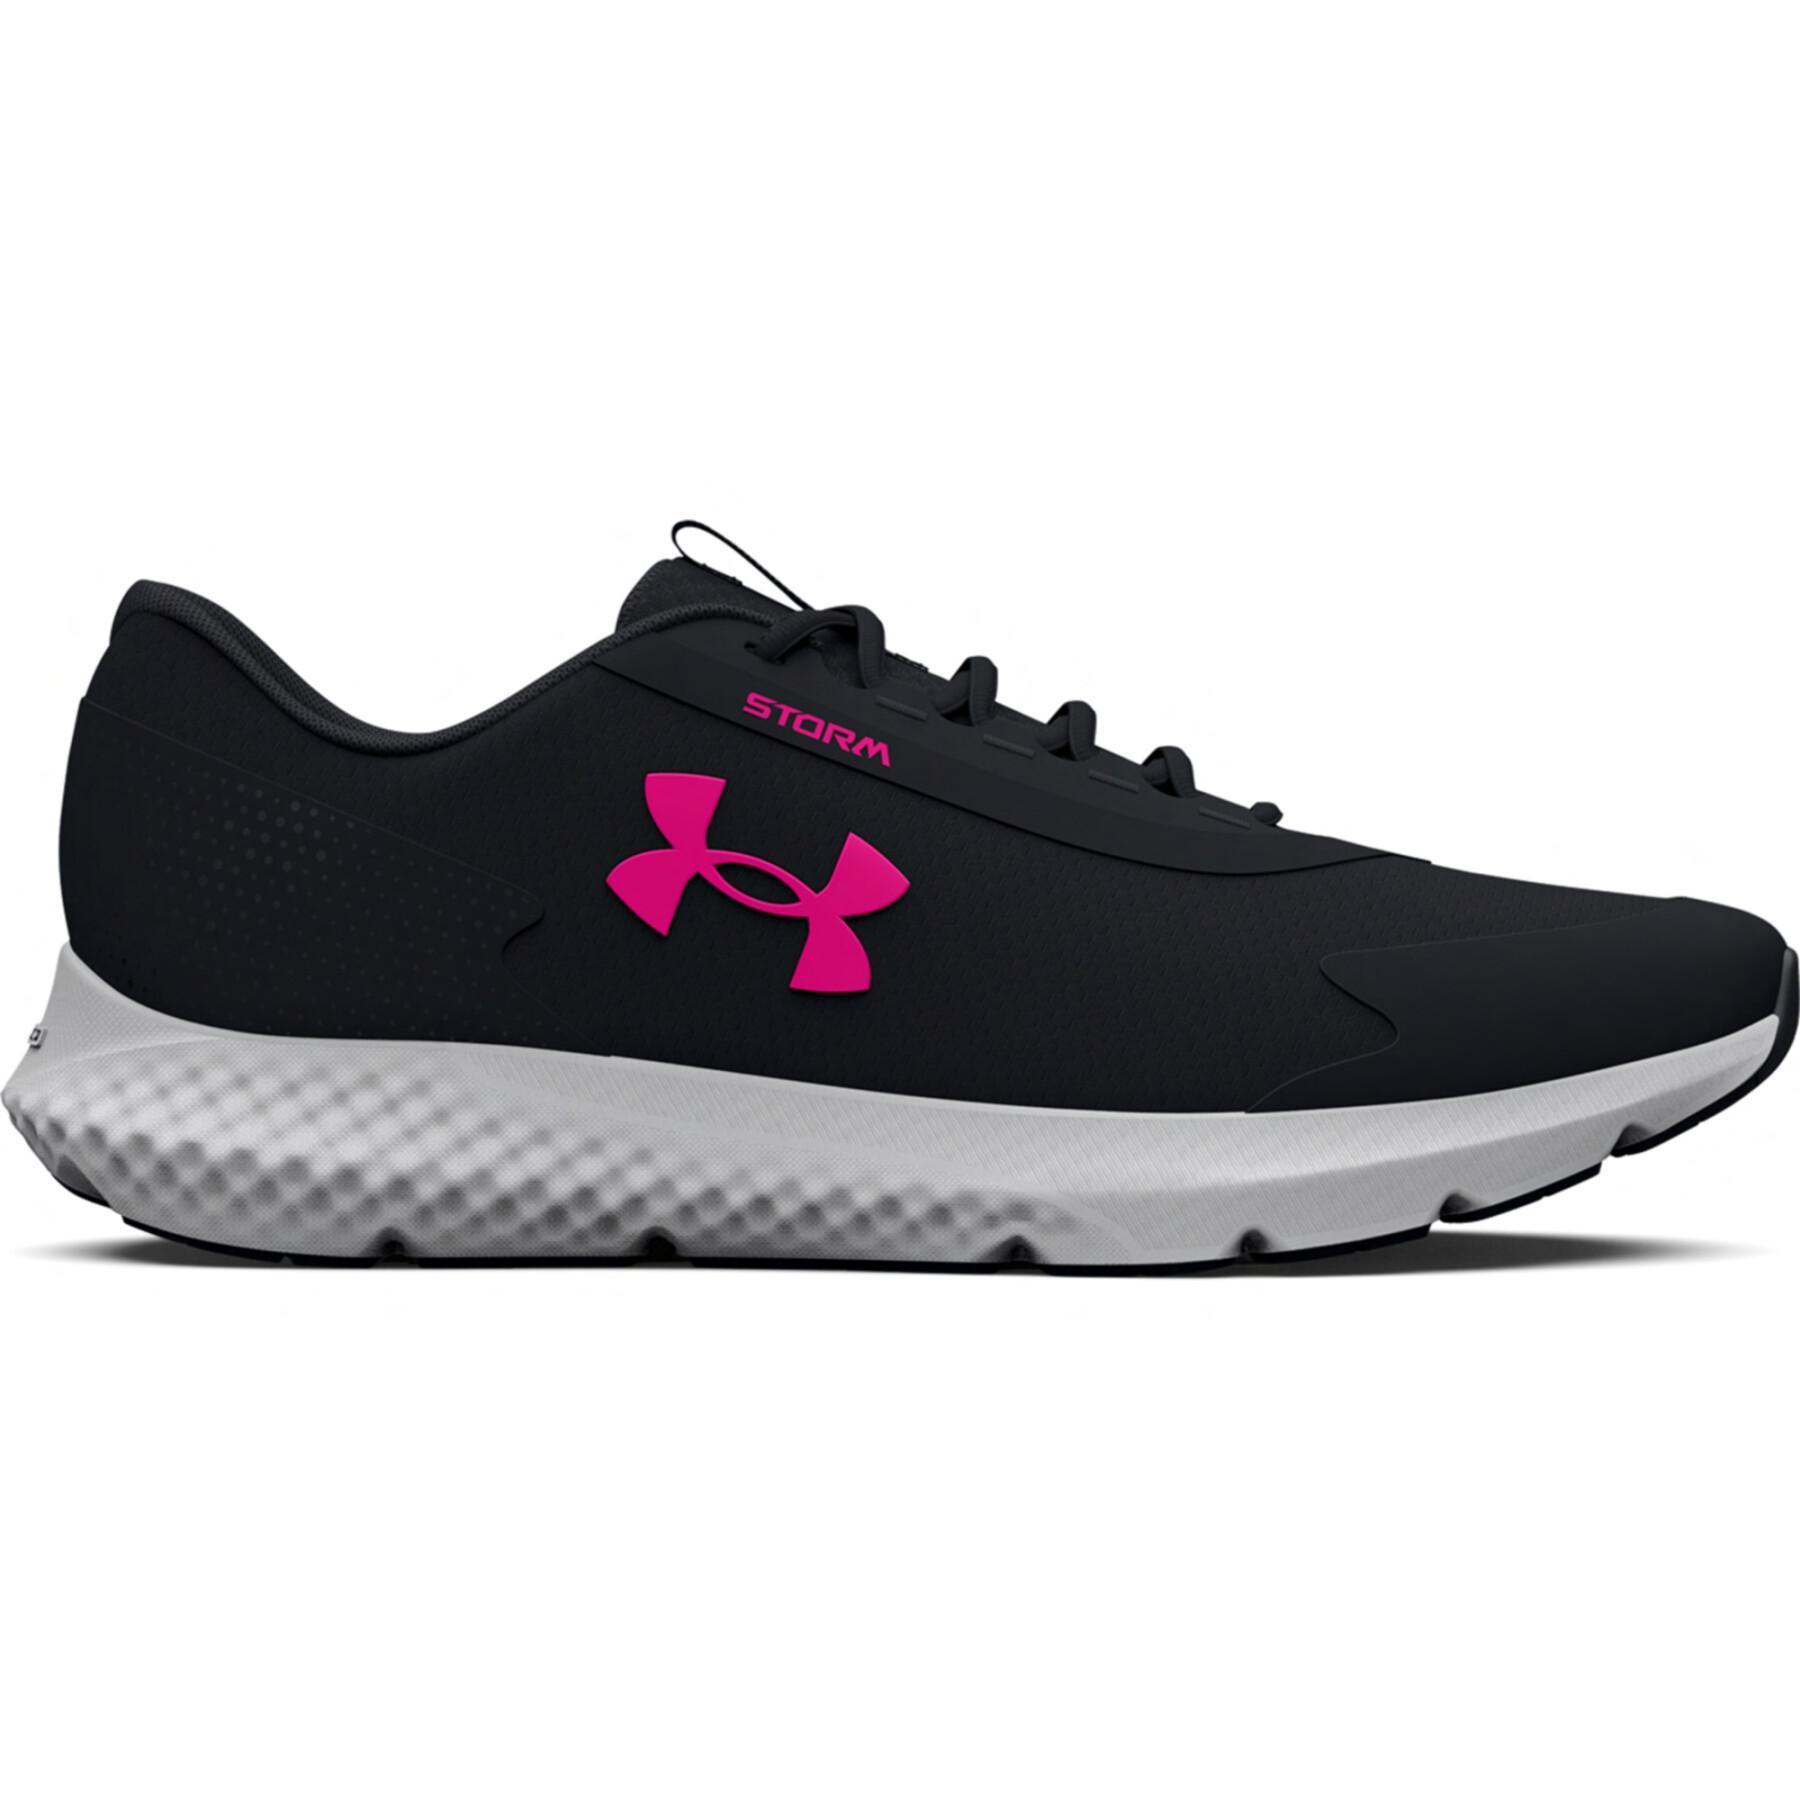 Chaussures de running femme Under Armour Charged Rogue 3 Storm